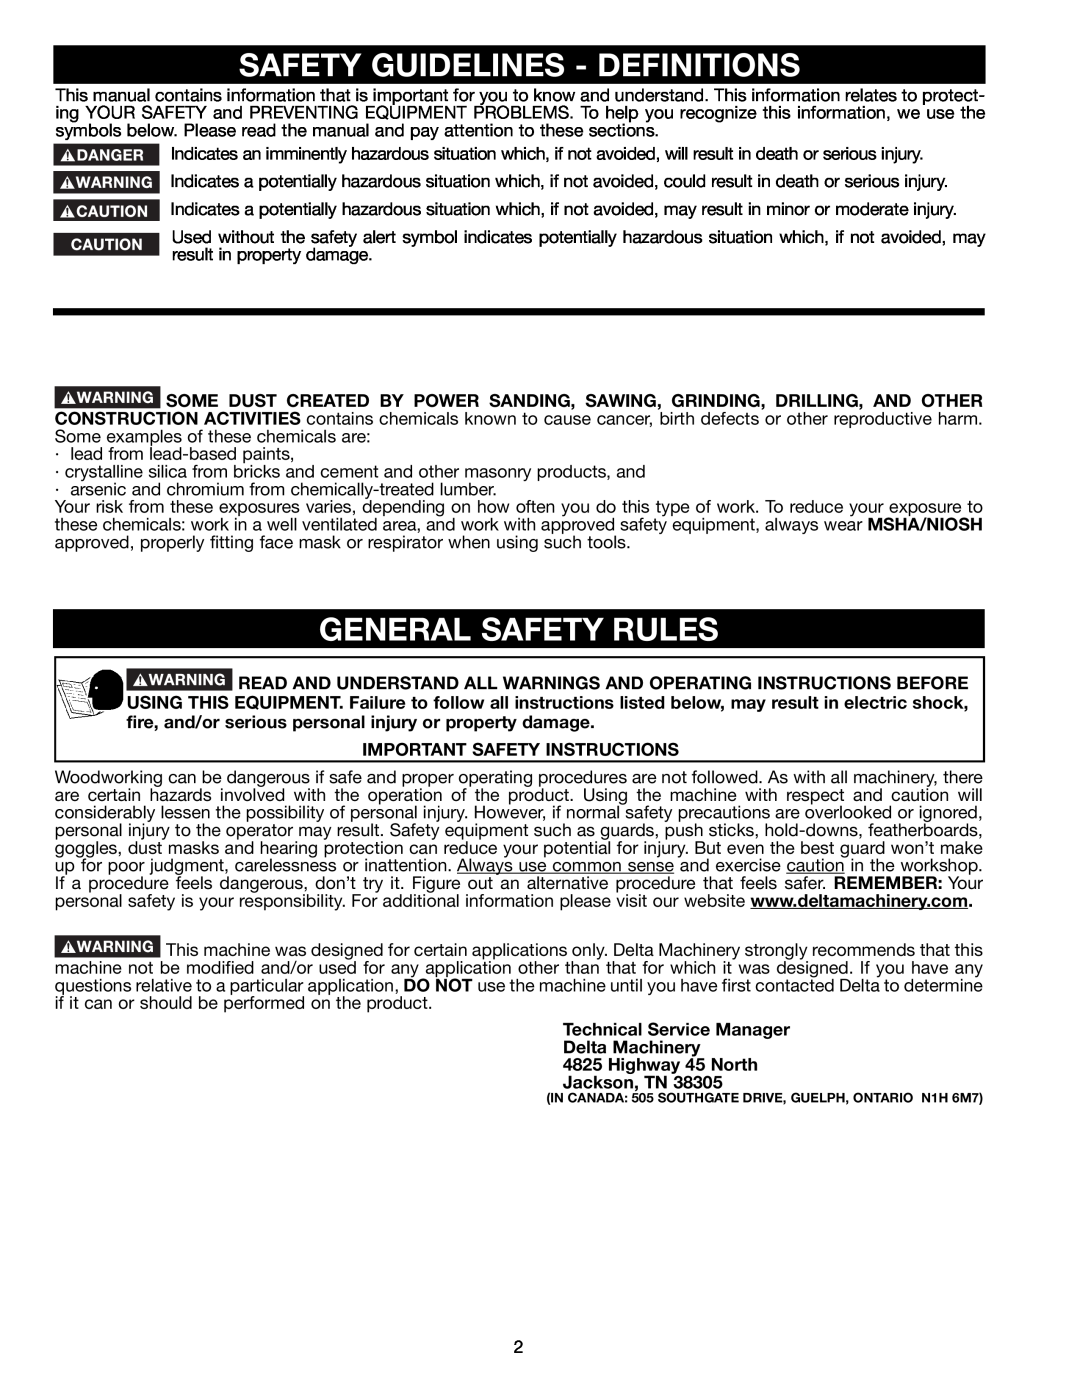 Delta BS150LS Safety Guidelines - Definitions, General Safety Rules, Important Safety Instructions, Jackson, TN 